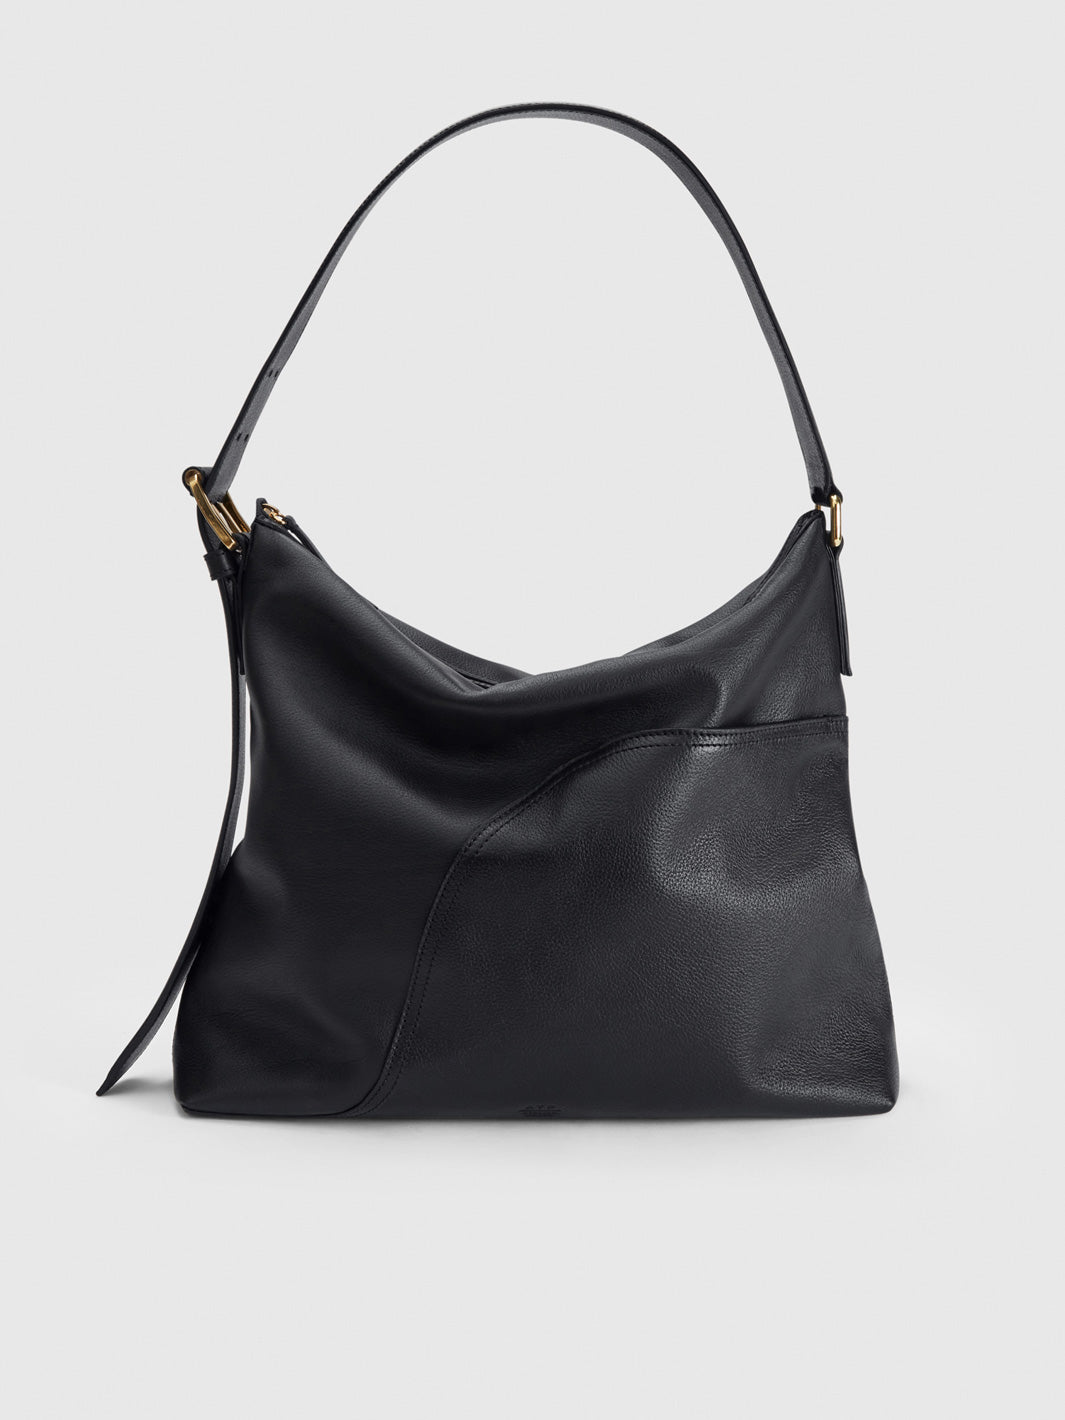 Bassano Black Grained Leather/Leather Tote bag